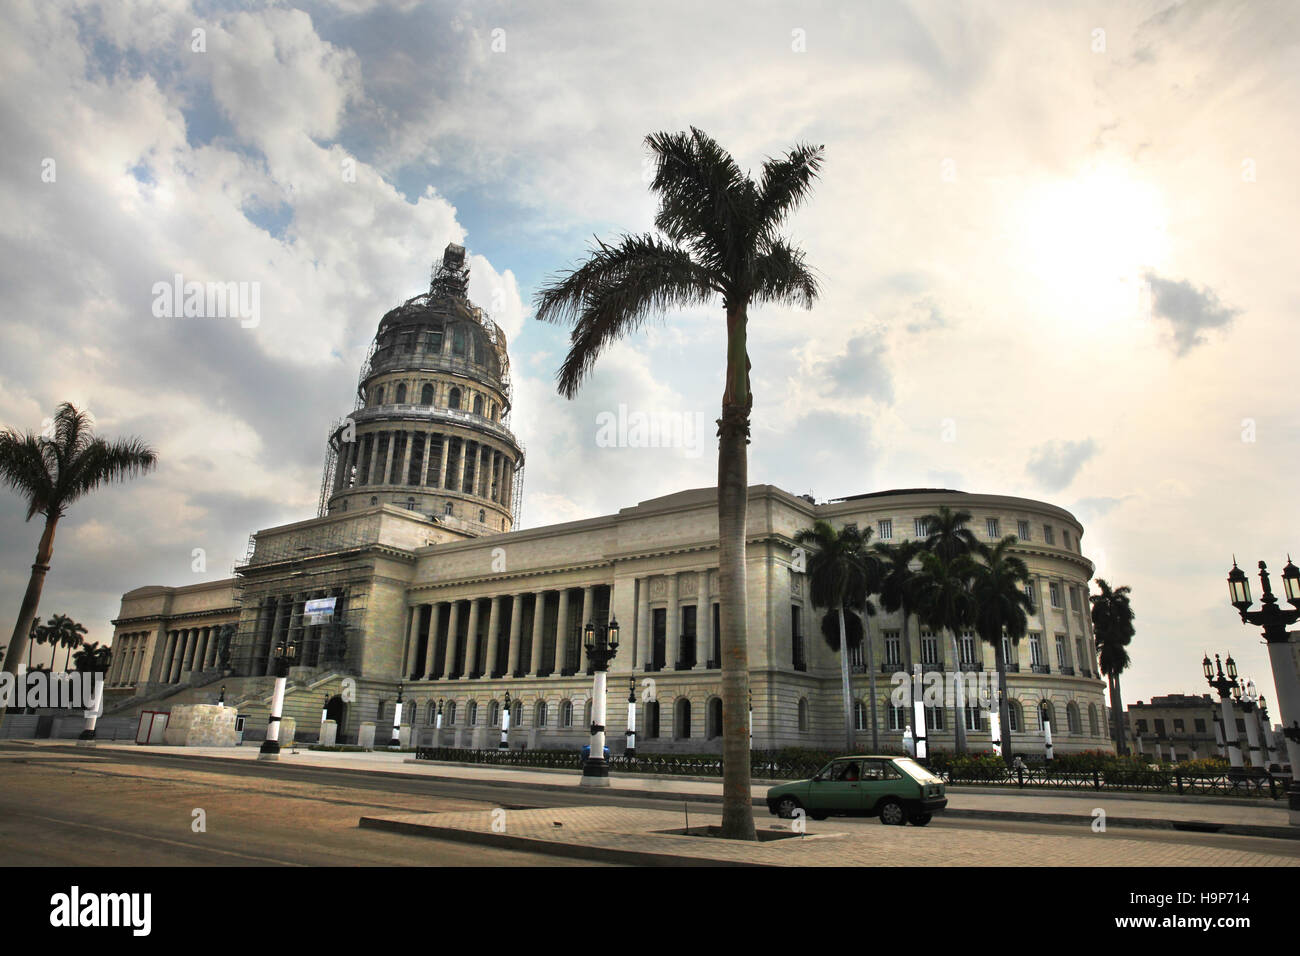 El Capitolio or National Capitol Building in Havana, Cuba. Previously the seat of government, now Cuban Academy of Sciences. Stock Photo